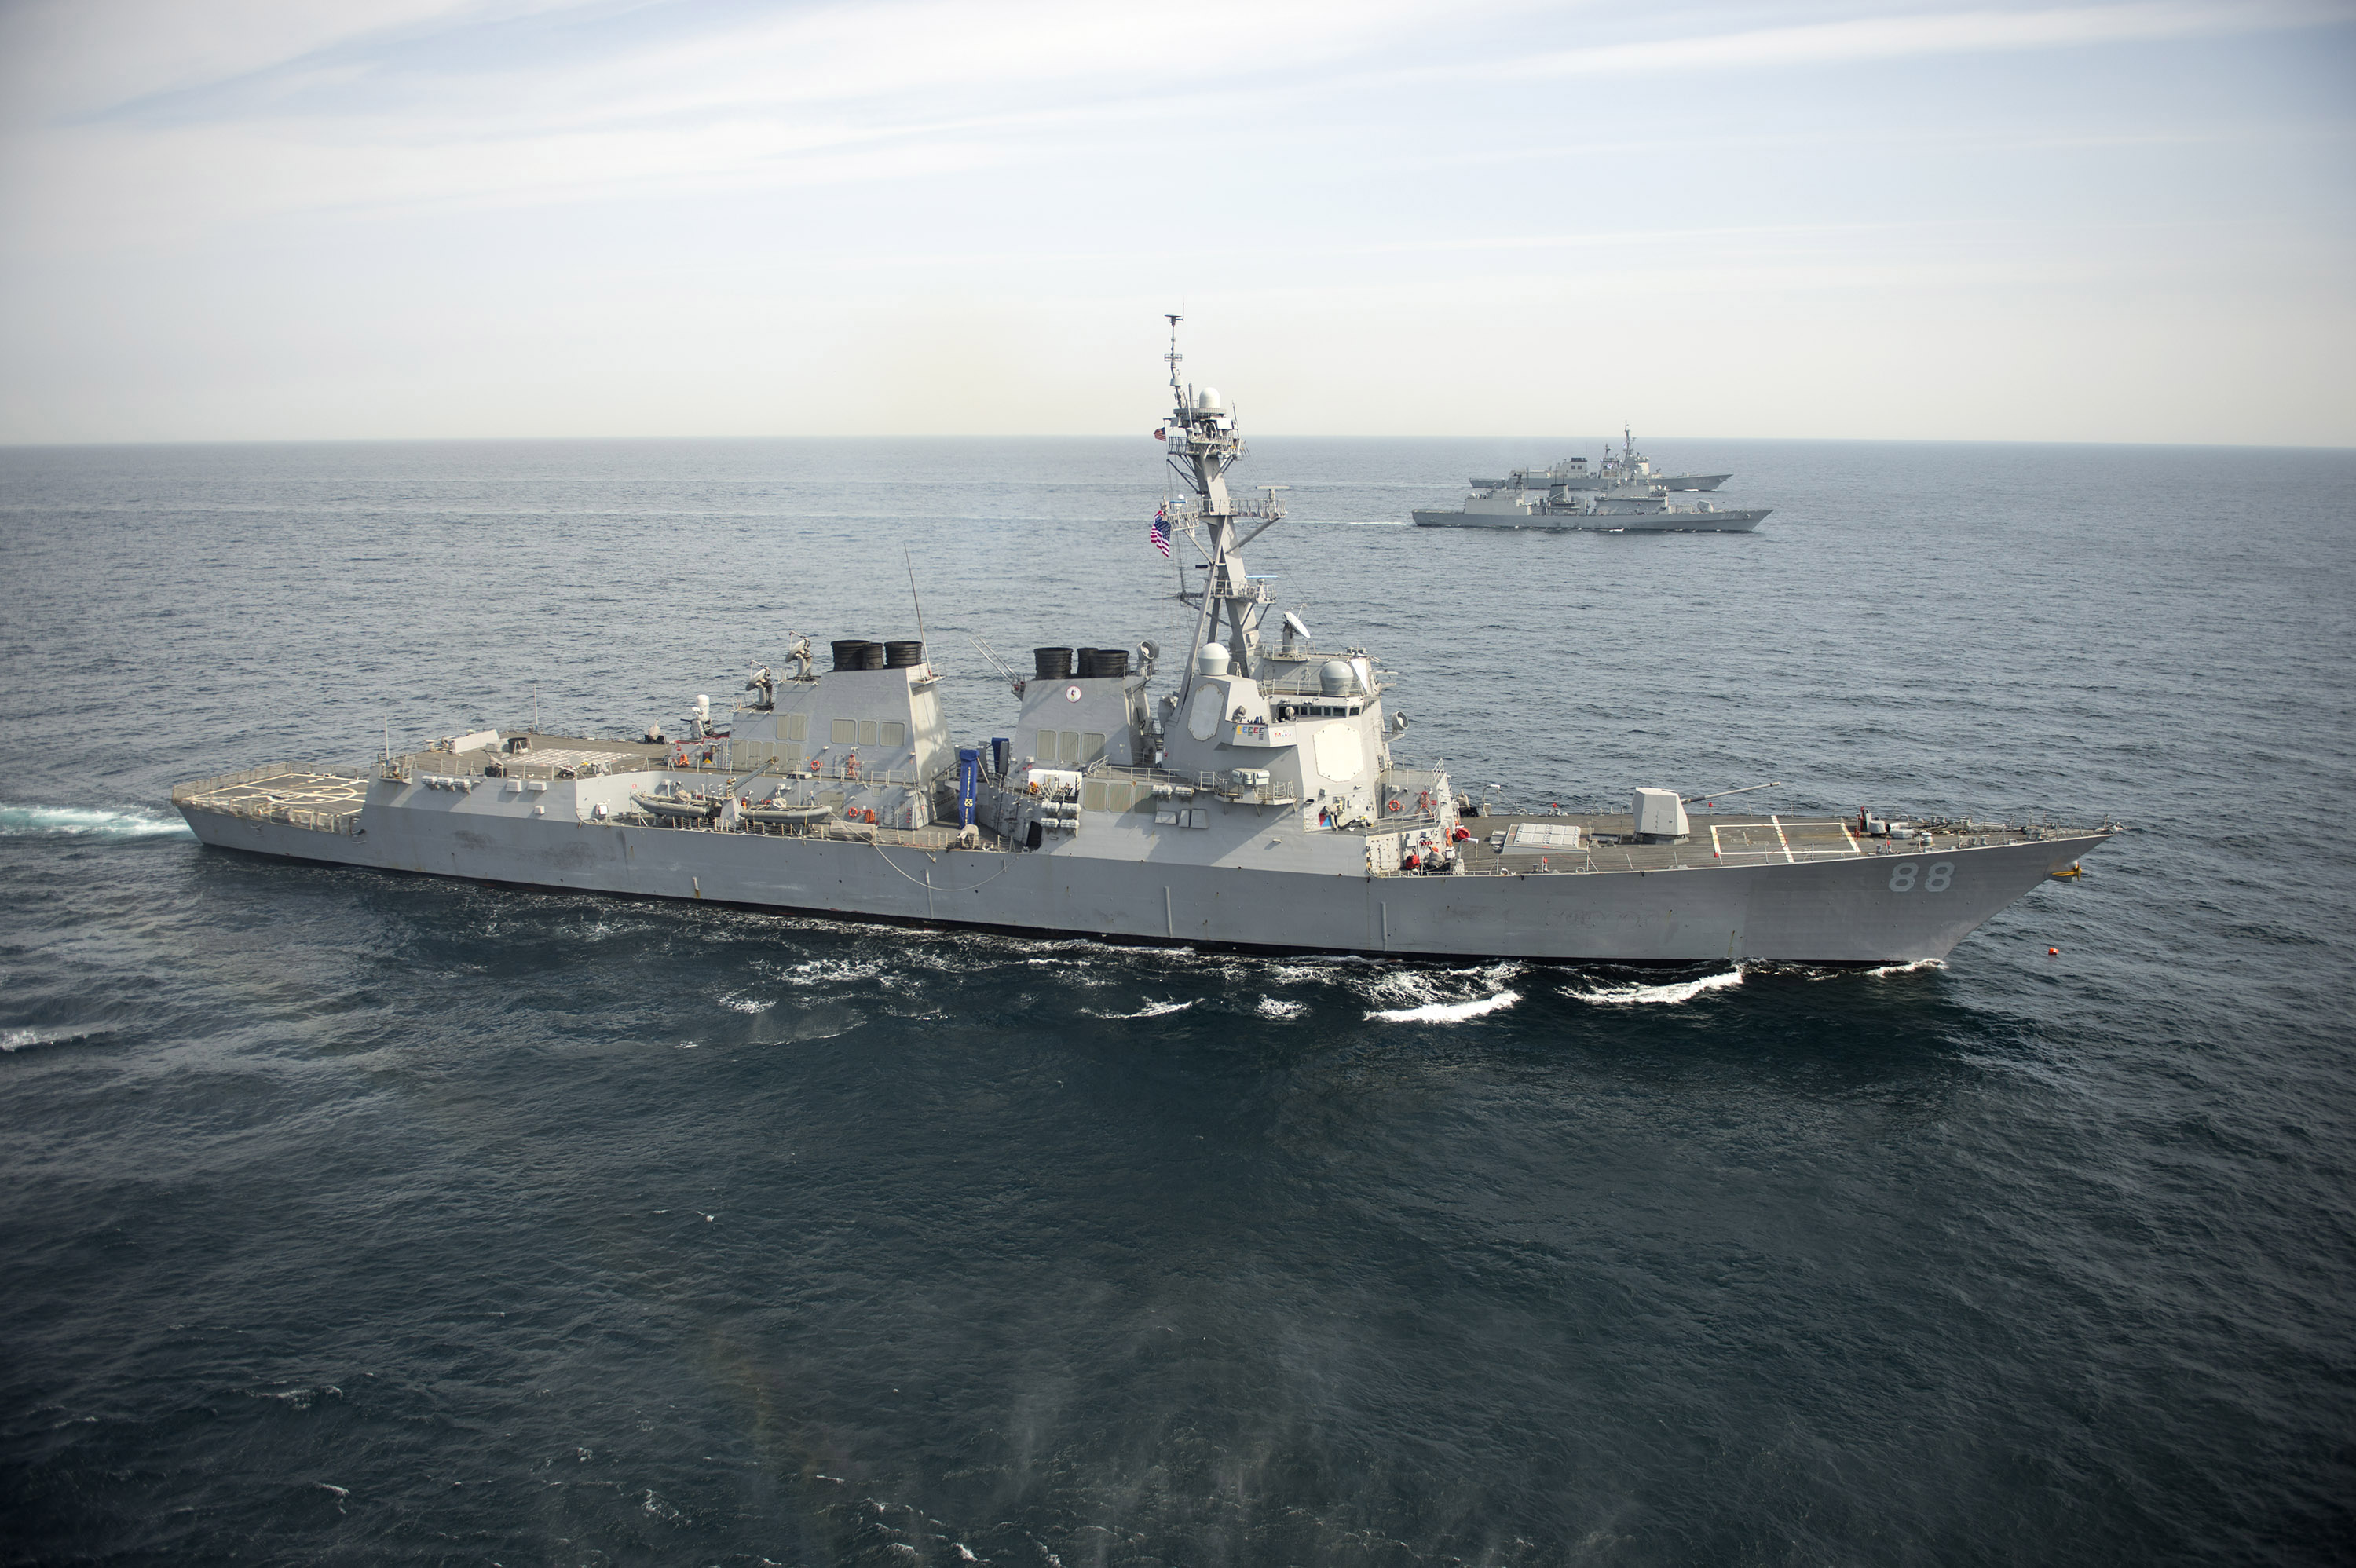 Arleigh-Burke class guided-missile destroyer USS Preble (DDG-88) underway on April 18, 2015. US Navy Photo 